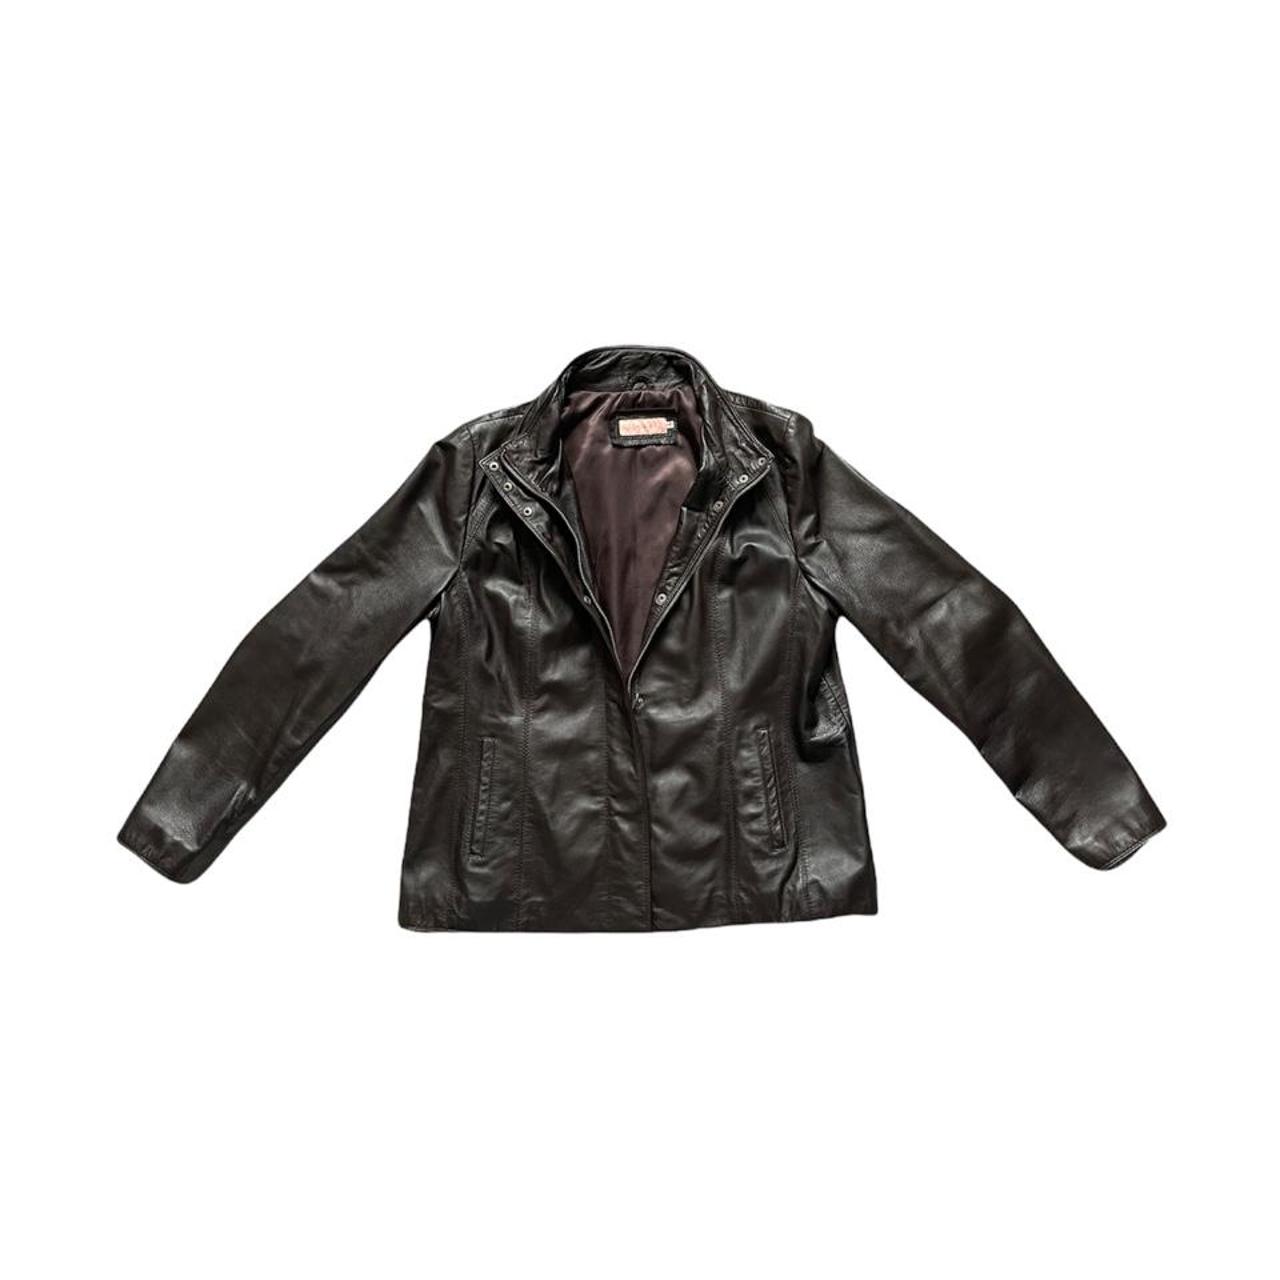 Product Image 1 - John Lewis genuine brown leather